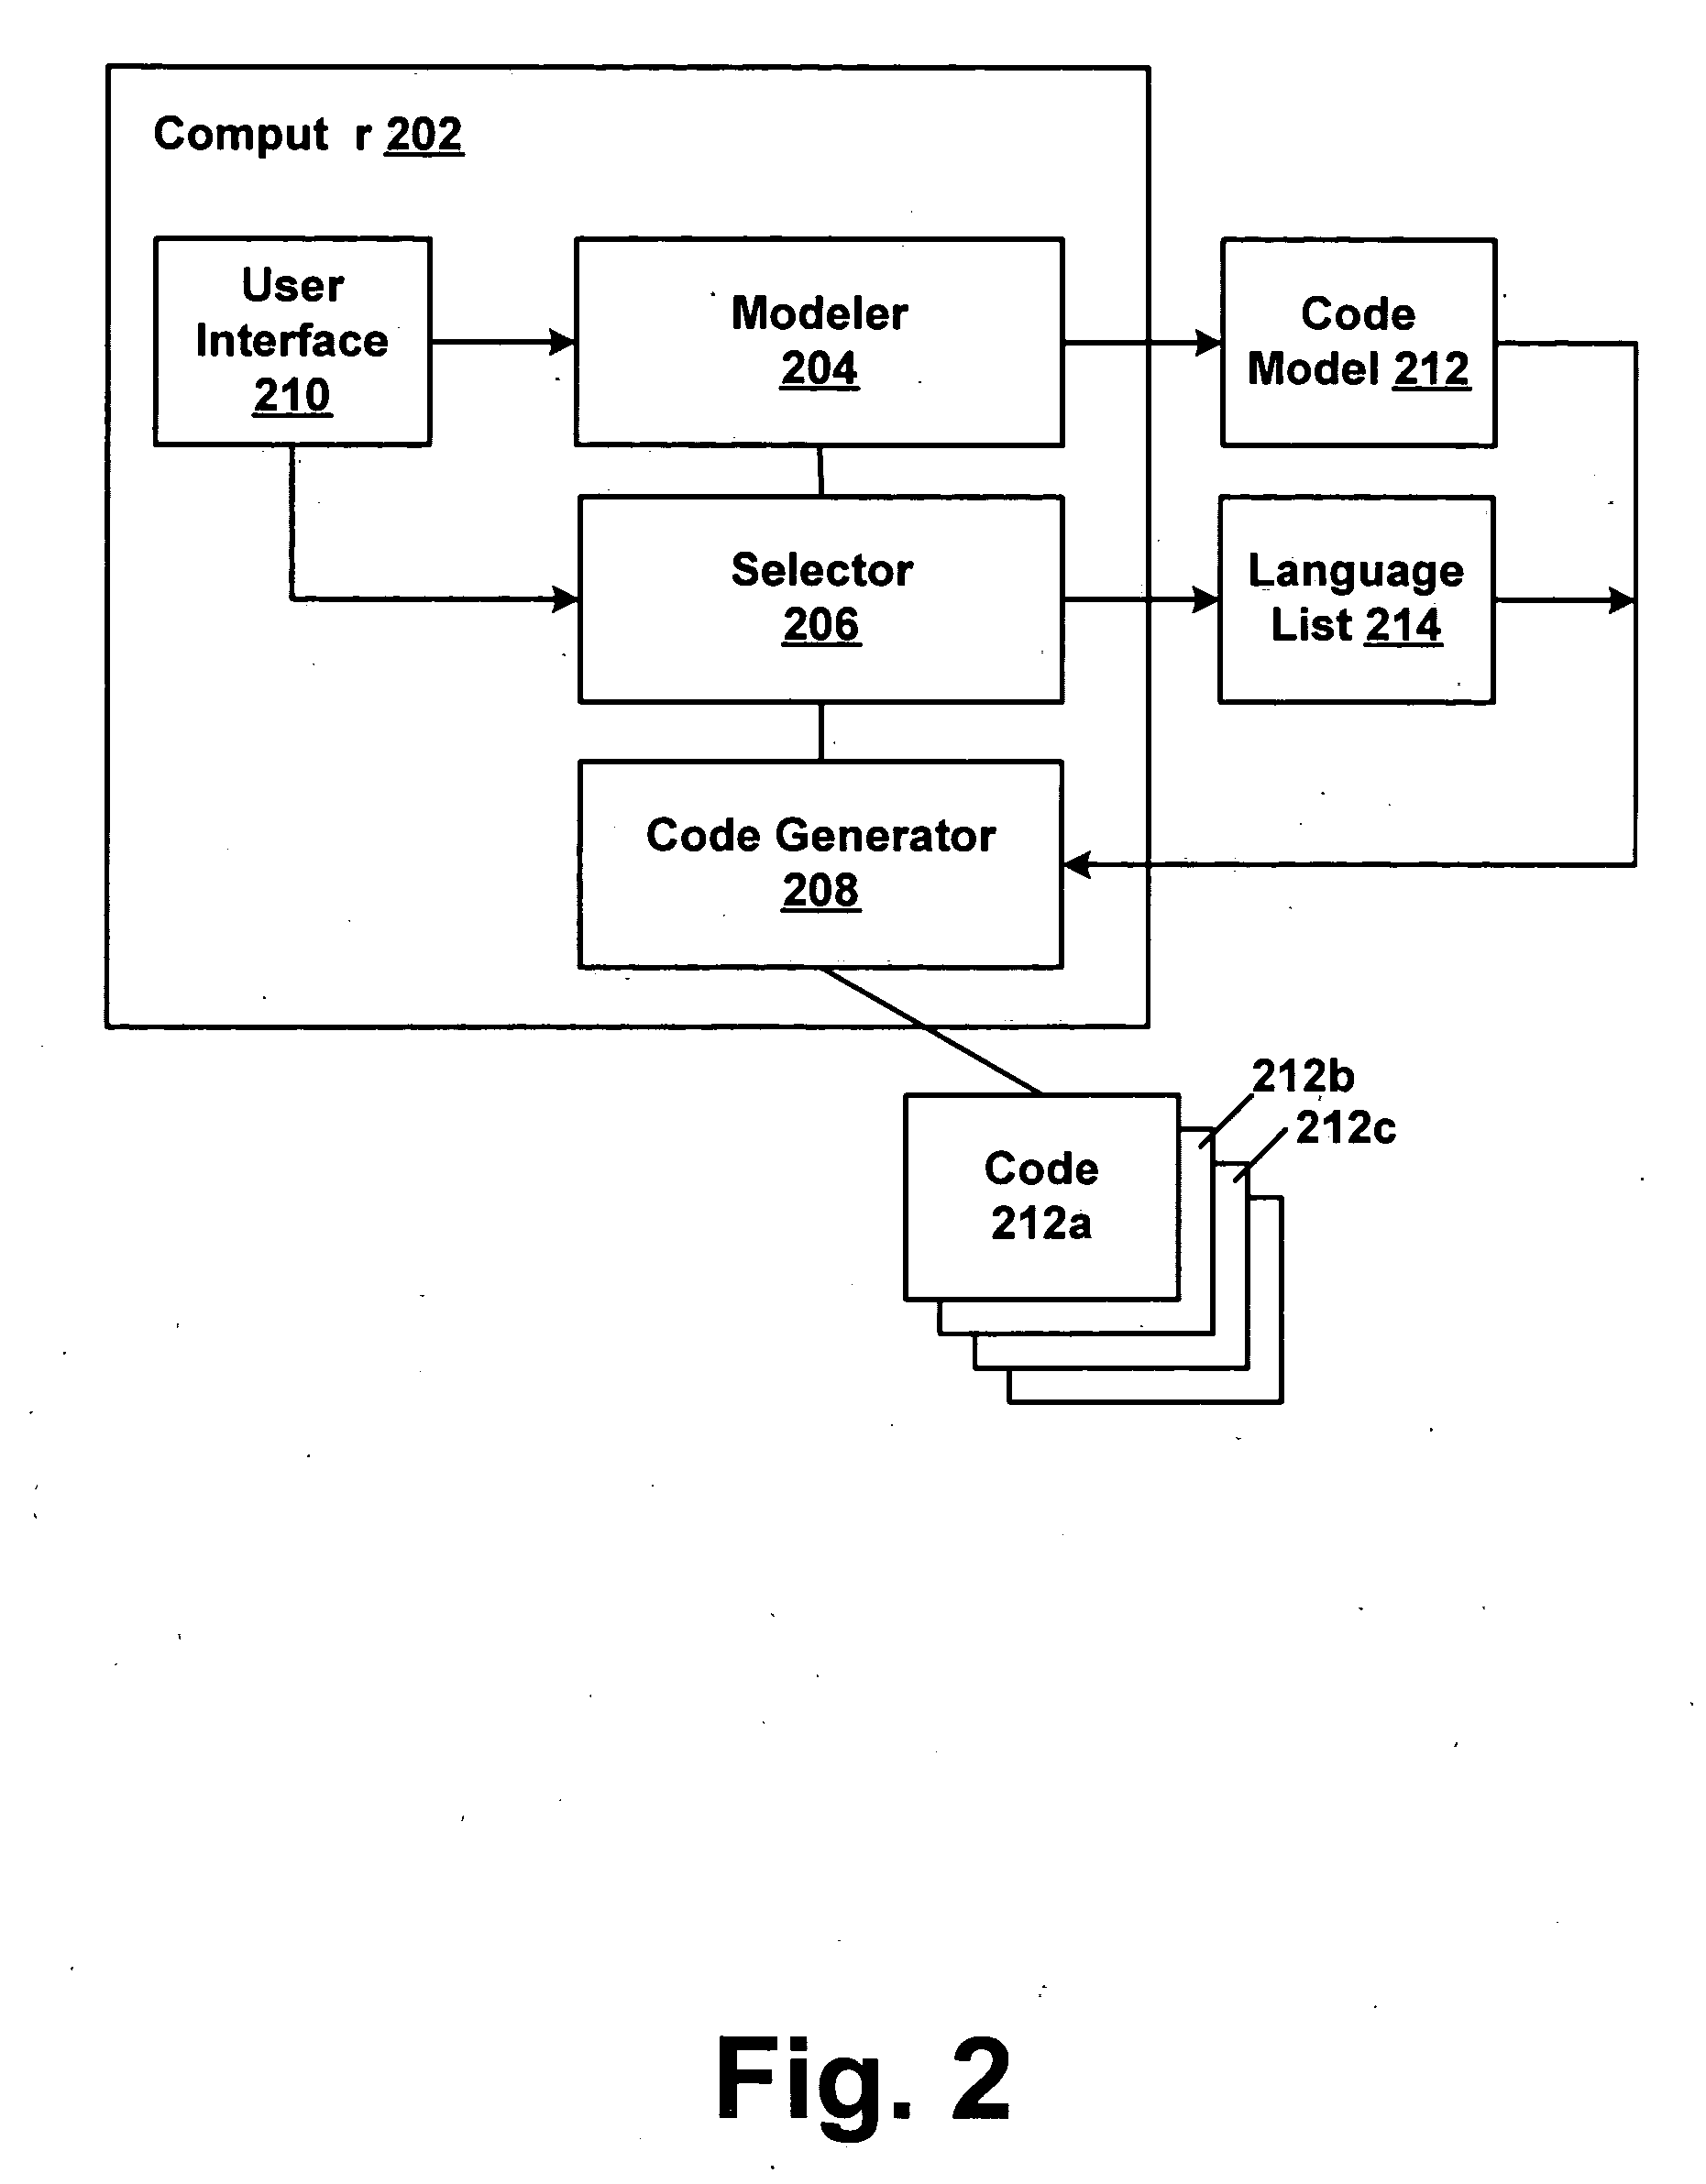 Automatically generating program code from a functional model of software